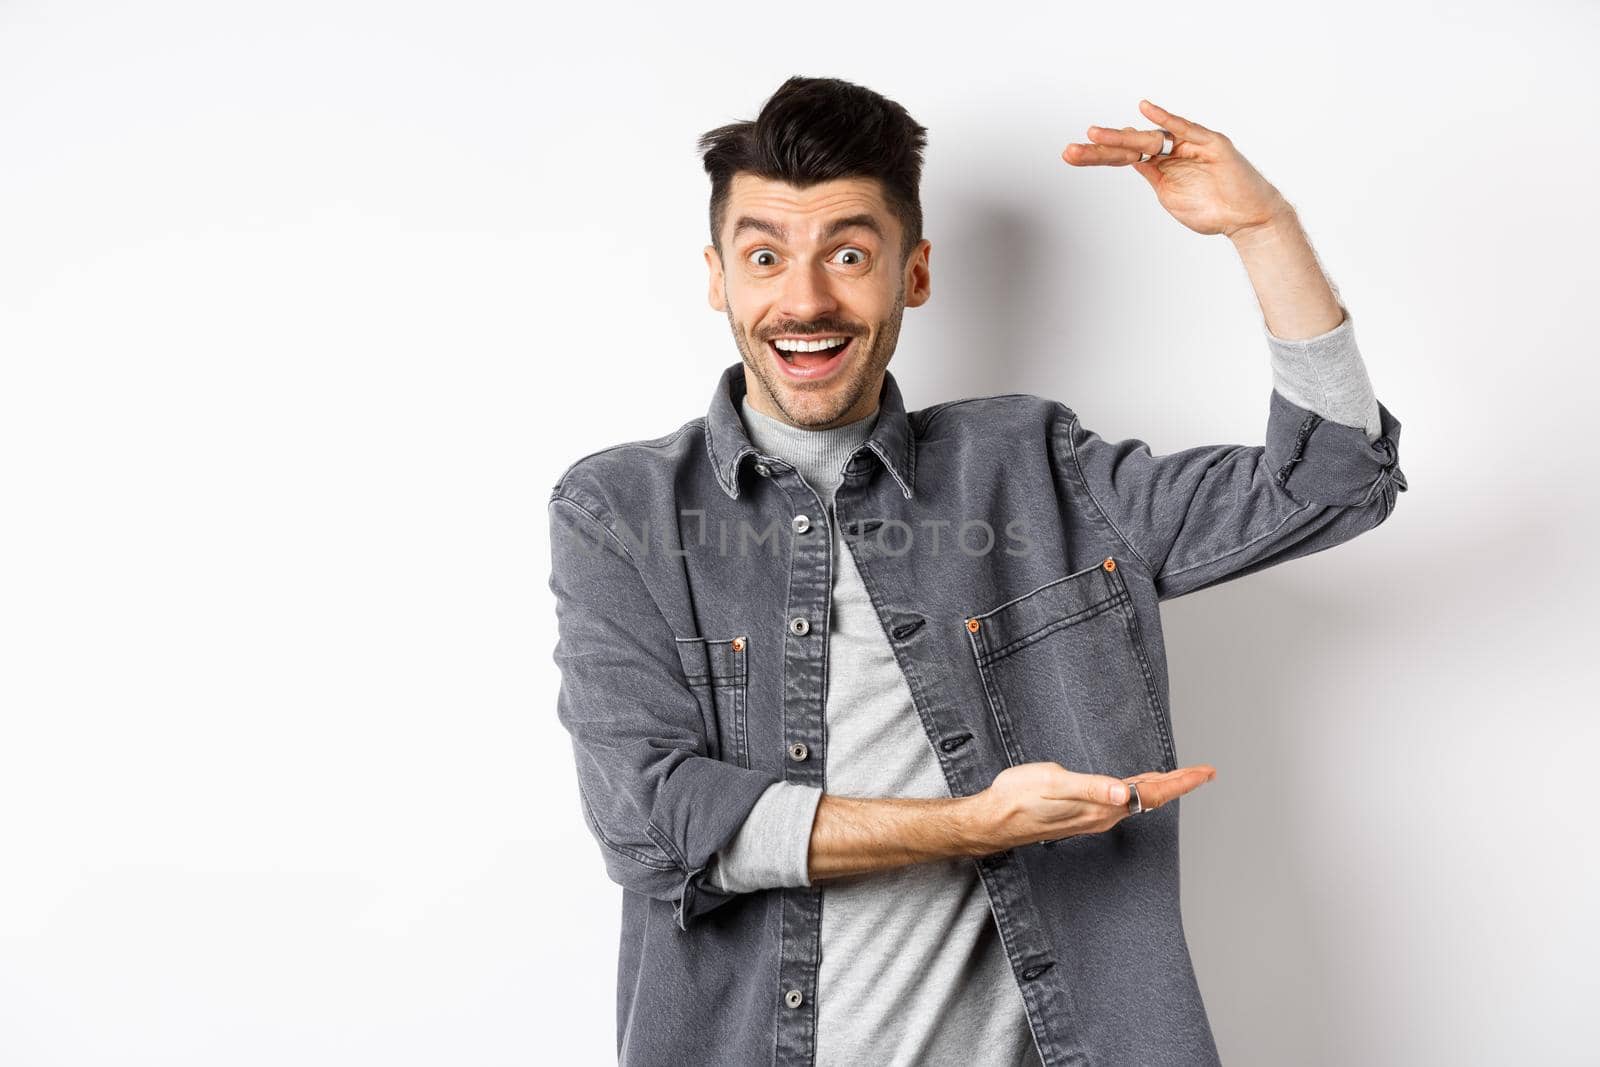 Cheerful guy smiling and showing big size, showing large thing and looking excited, standing against white background.